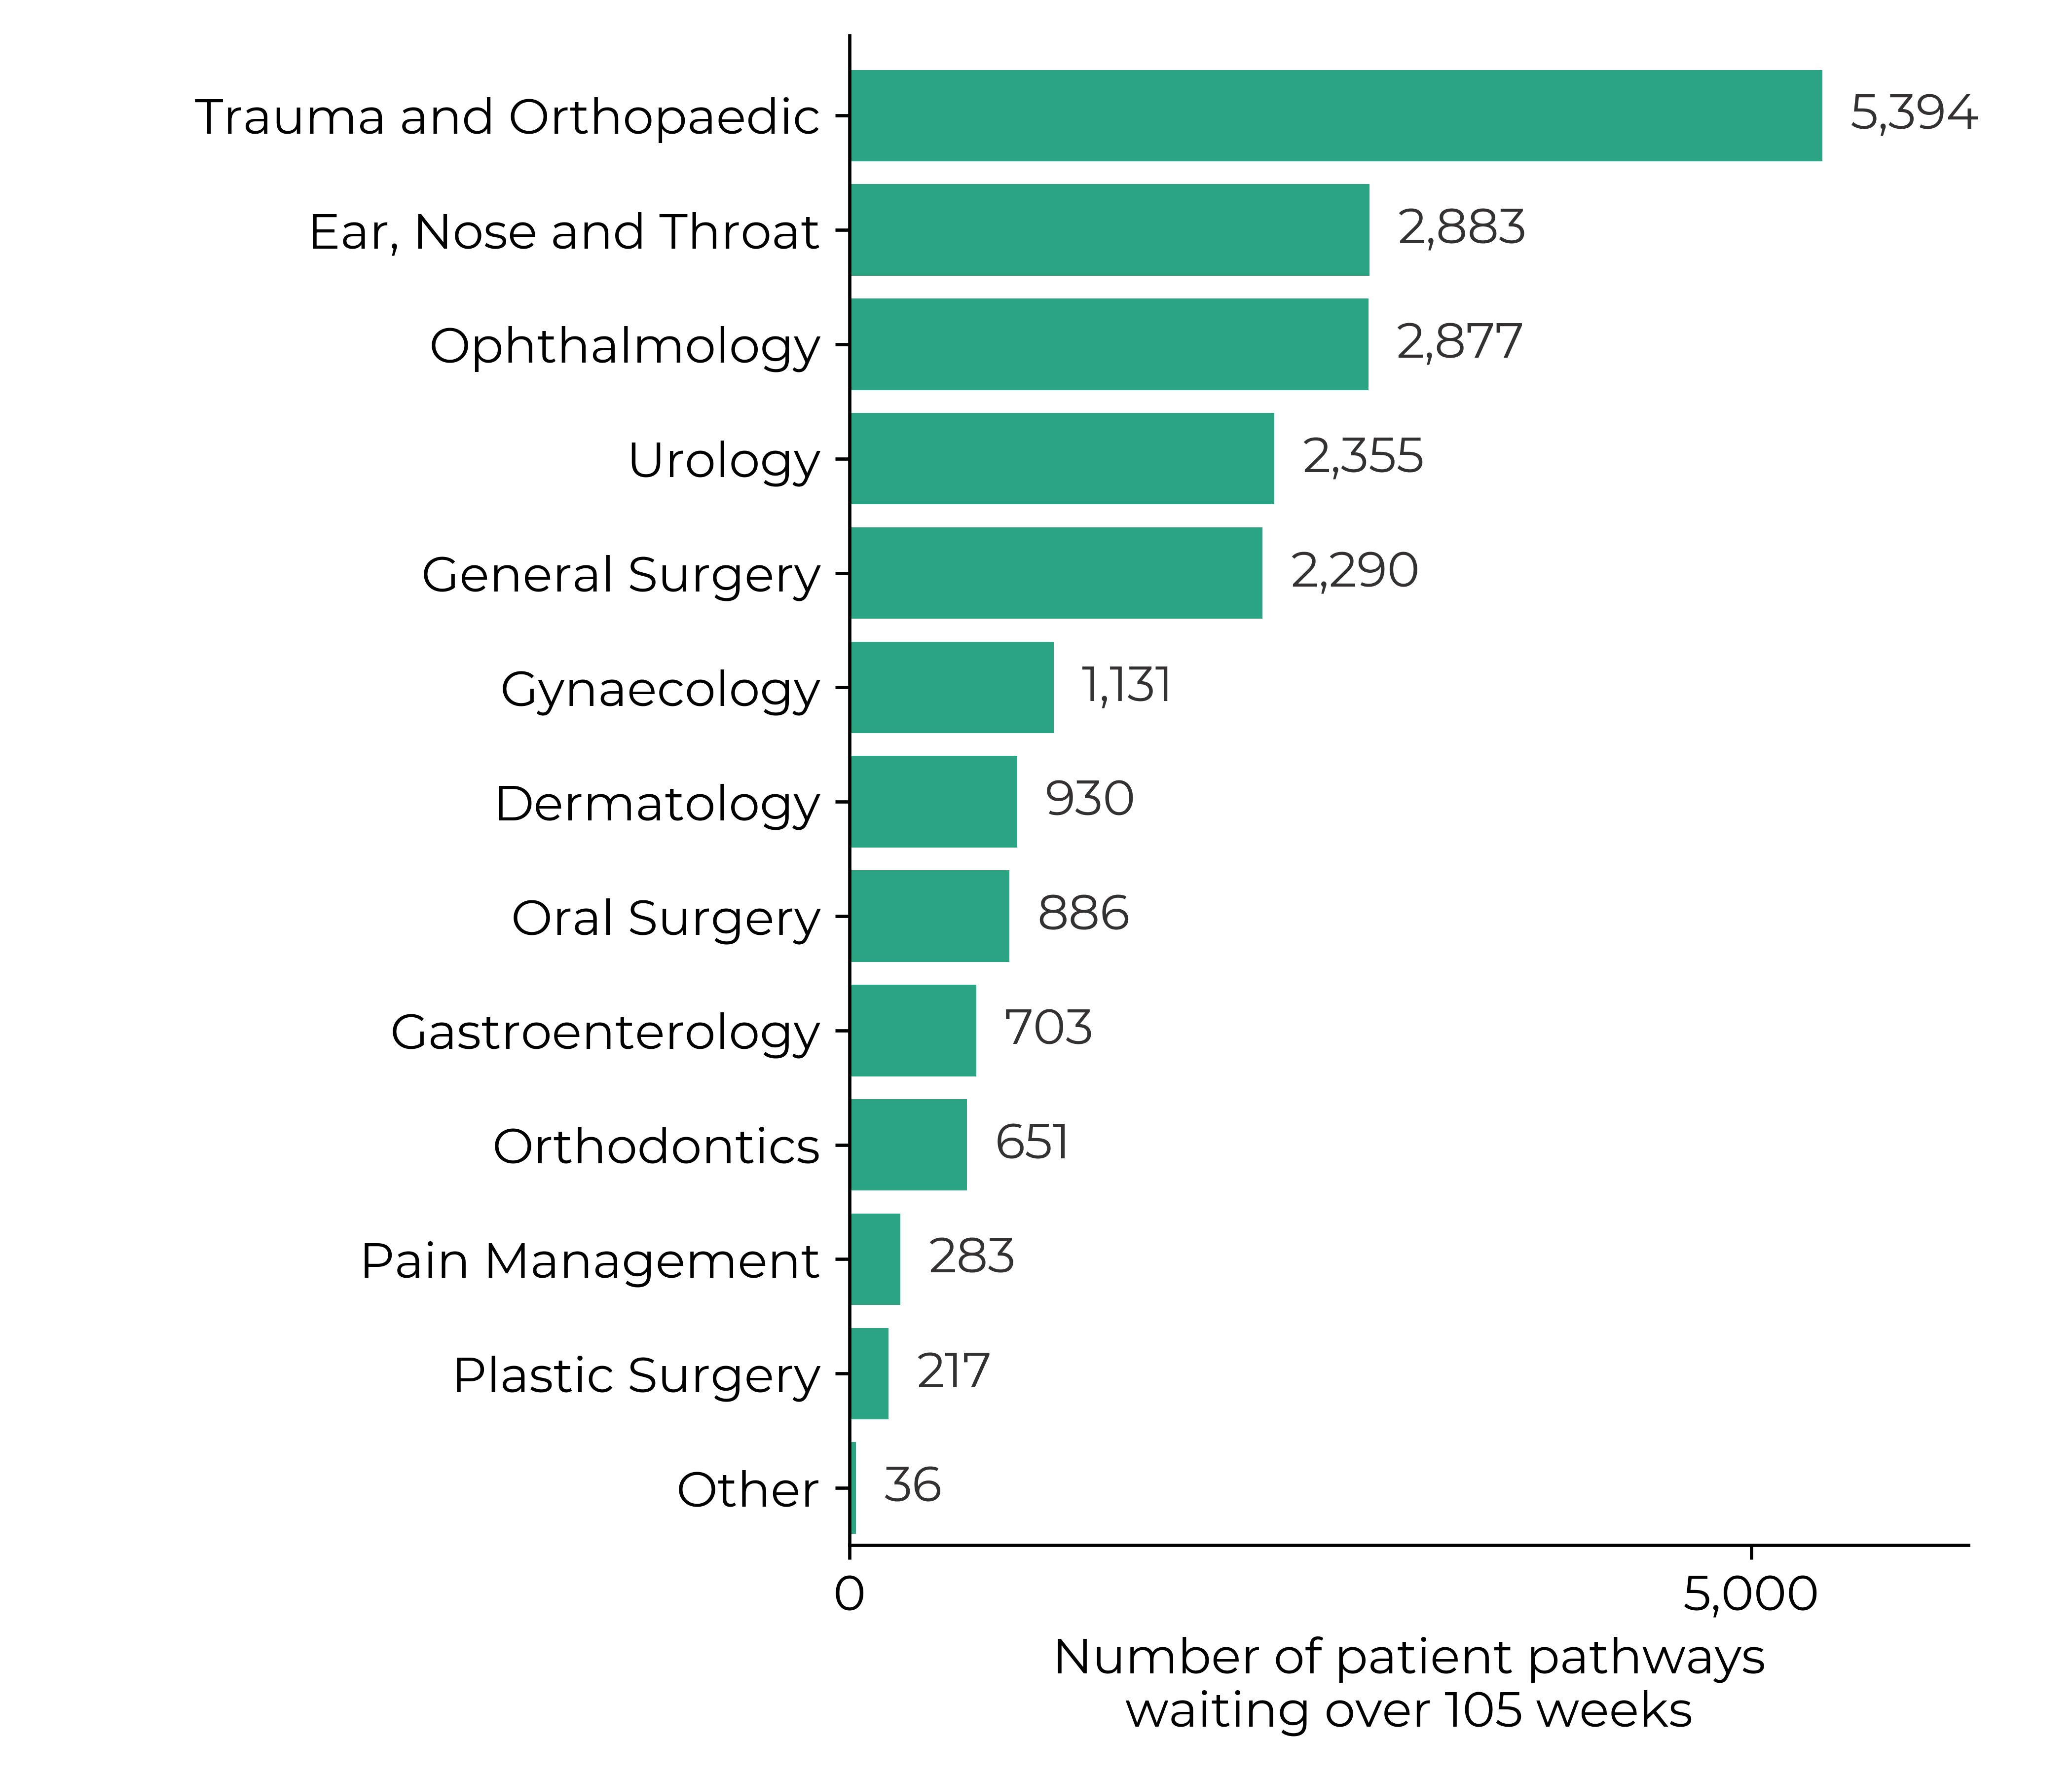 Graph showing the number of patient pathways waiting over 105 weeks in February 2024: trauma and orthopaedic (5,794), ophthalmology (3,786) and ear, nose and throat (2,996) had the largest number of patient pathways waiting. Against an ambition of no-one waiting more than 2 years in most specialties by March 2023.